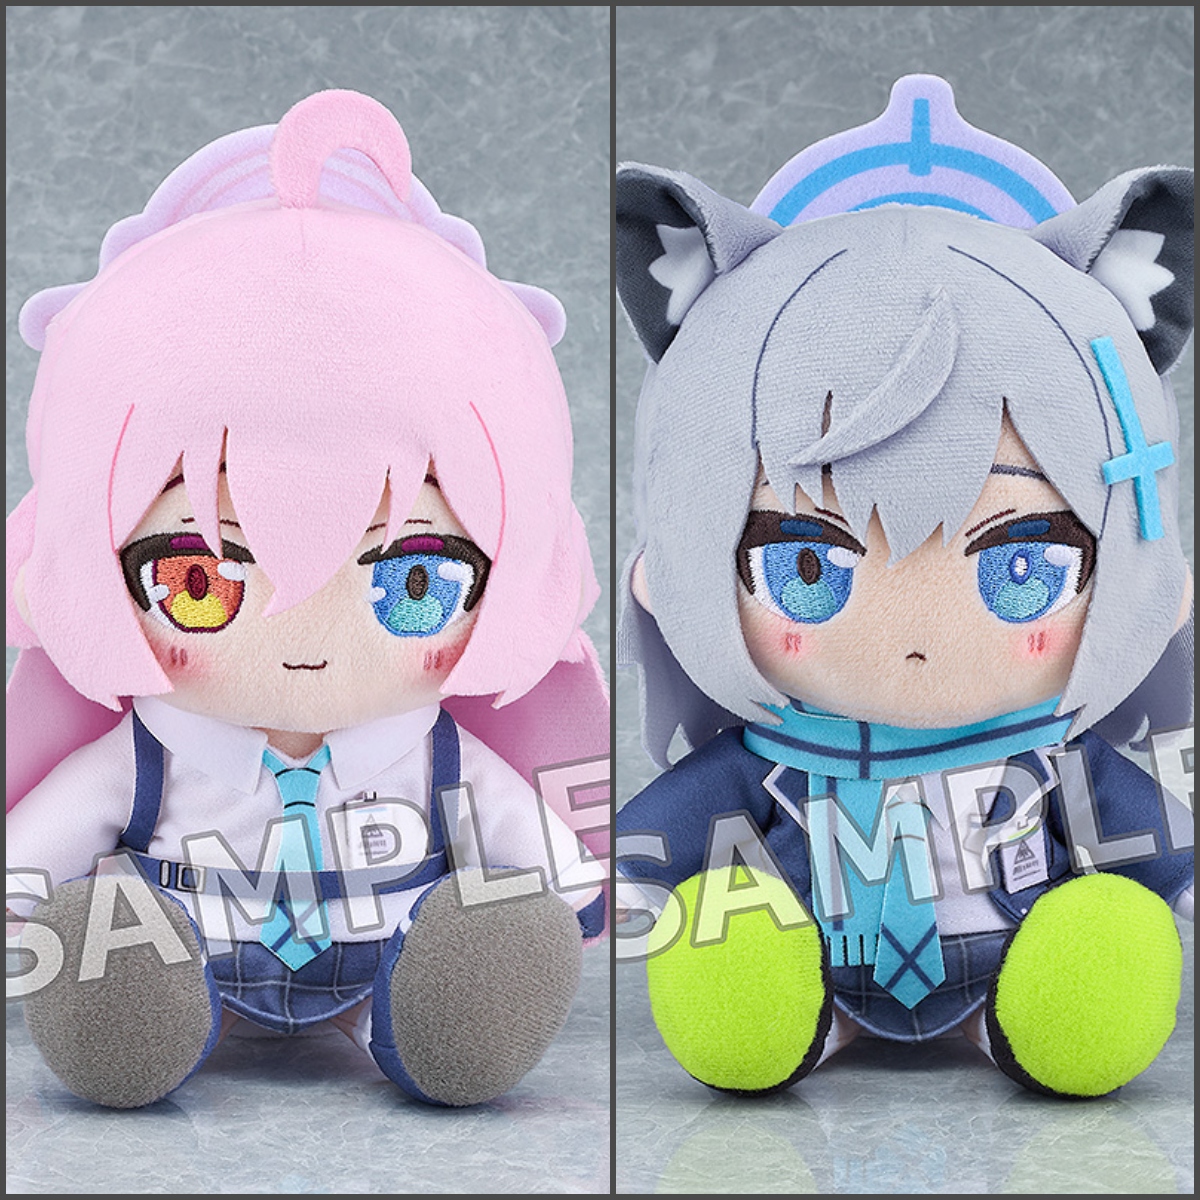 From 'Blue Archive' comes Chocopuni Plushie Shiroko and Chocopuni Plushie Hoshino! Preorder today to add them to your collection! Shop: s.goodsmile.link/hzZ #BlueArchive #Goodsmile